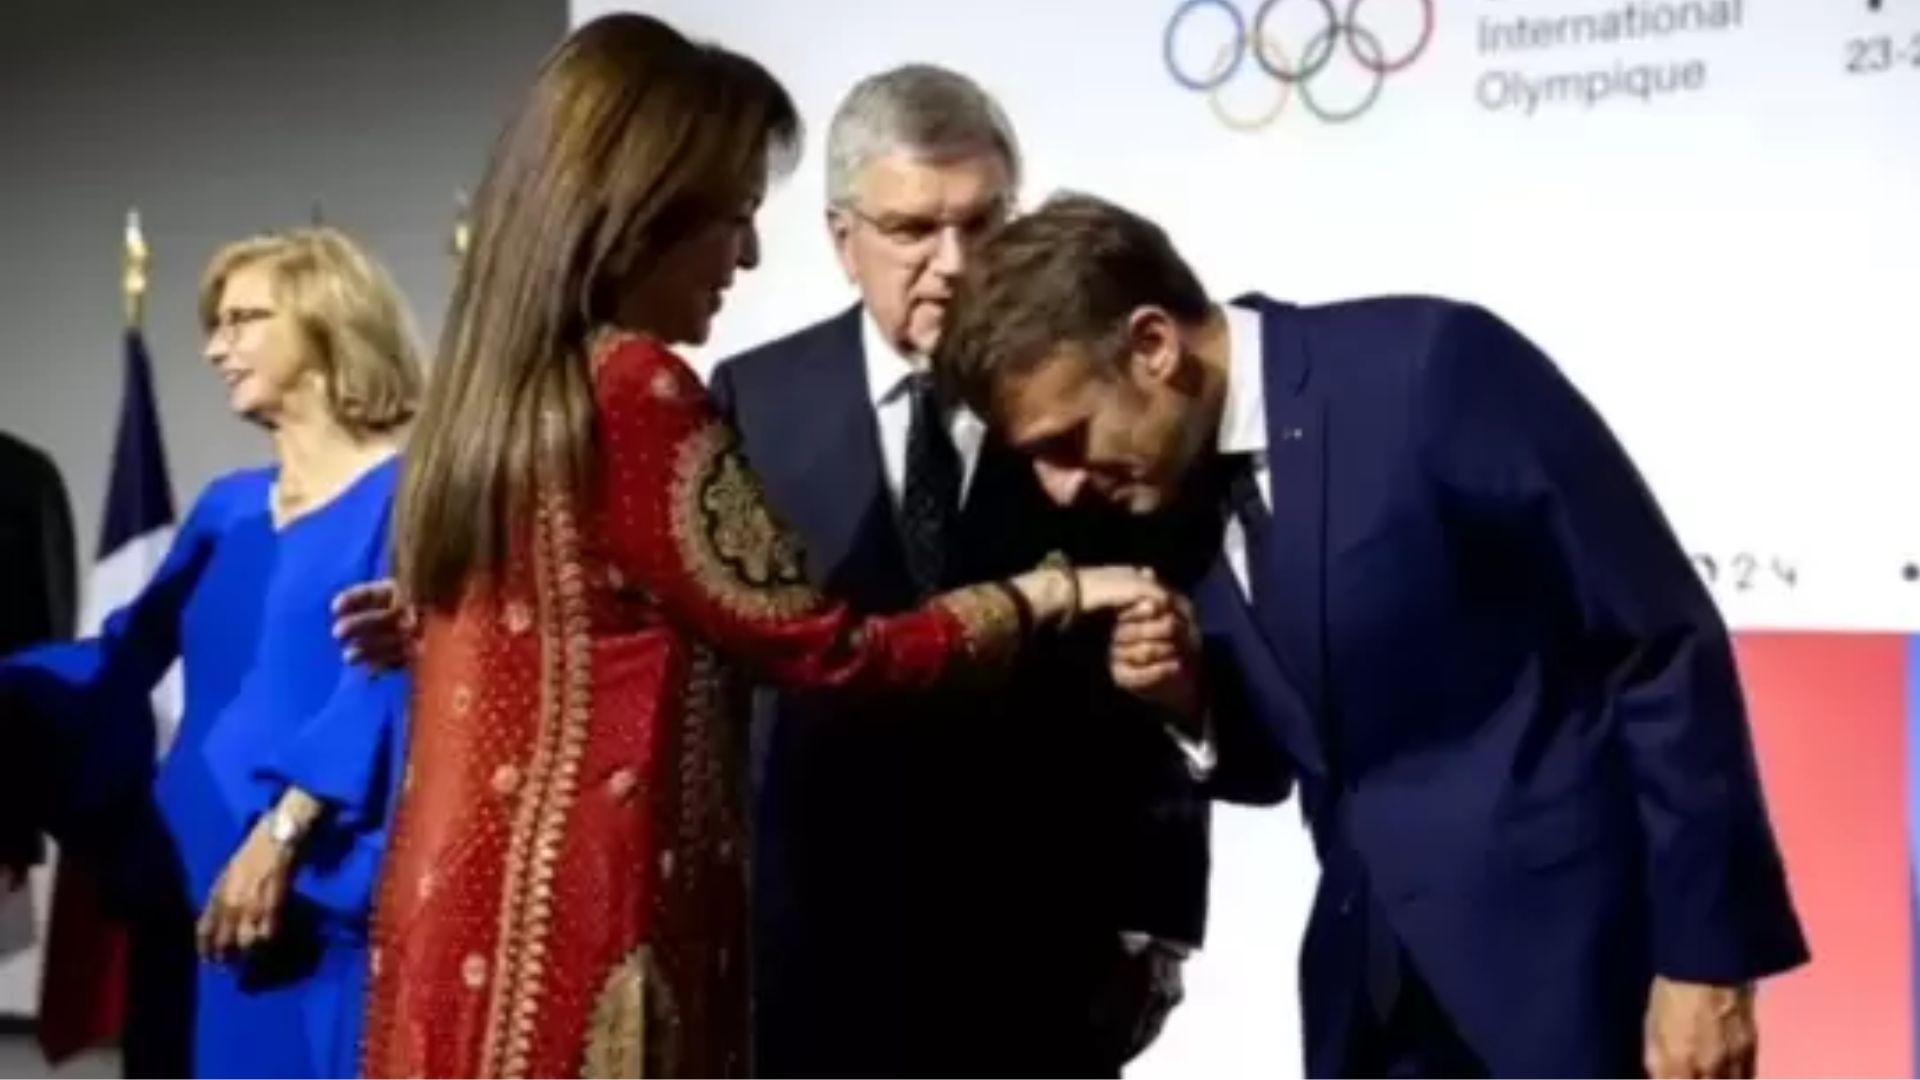 Nita Ambani Welcomed by Emmanuel Macron at 2024 Paris Olympics Event in Embroidered Red Suit